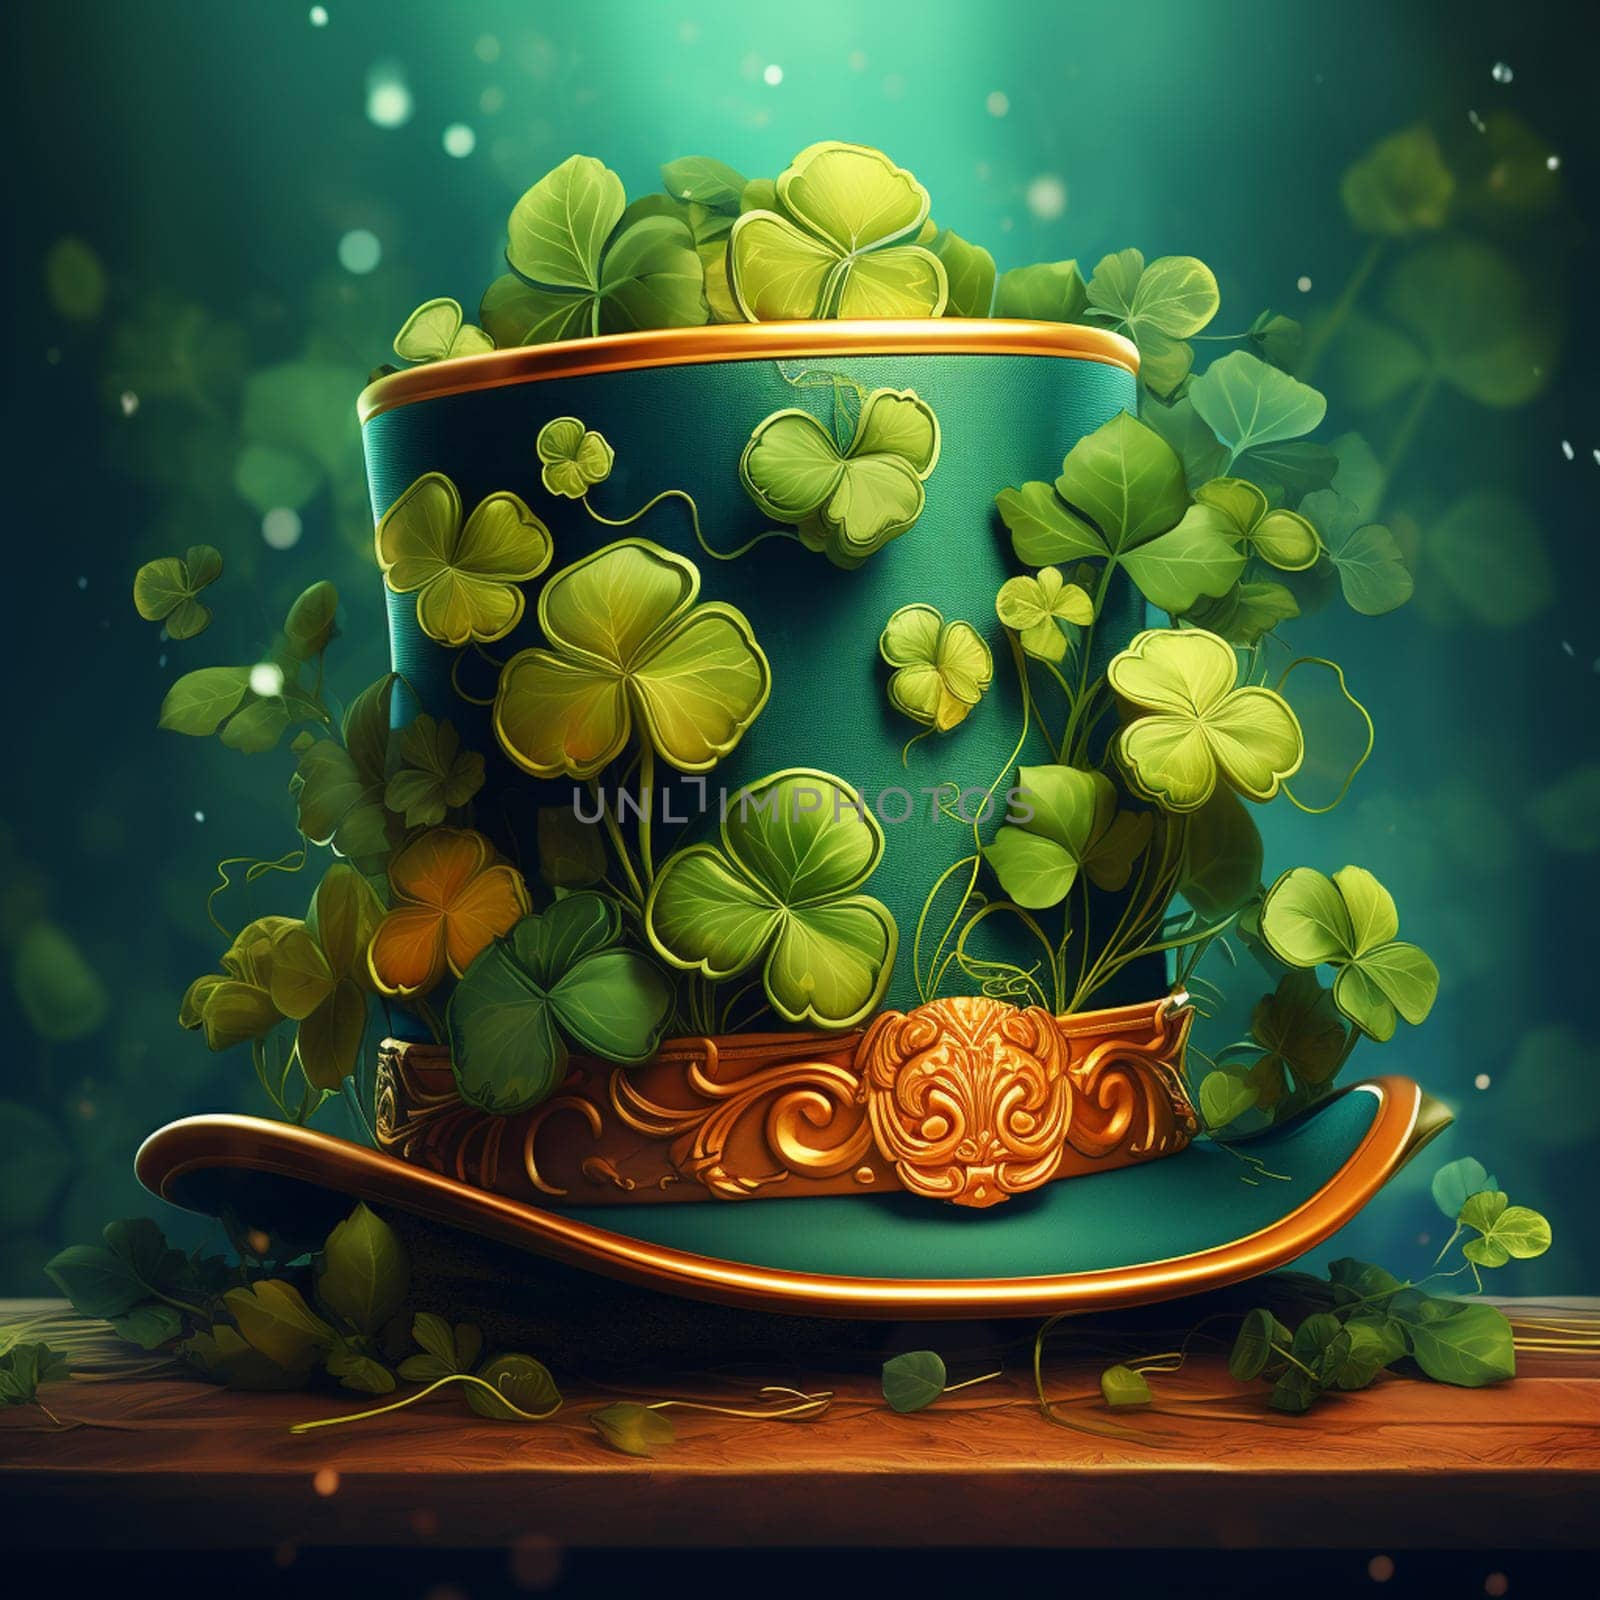 St Patrick's shiny green hat on glowing bokeh background. High quality photo